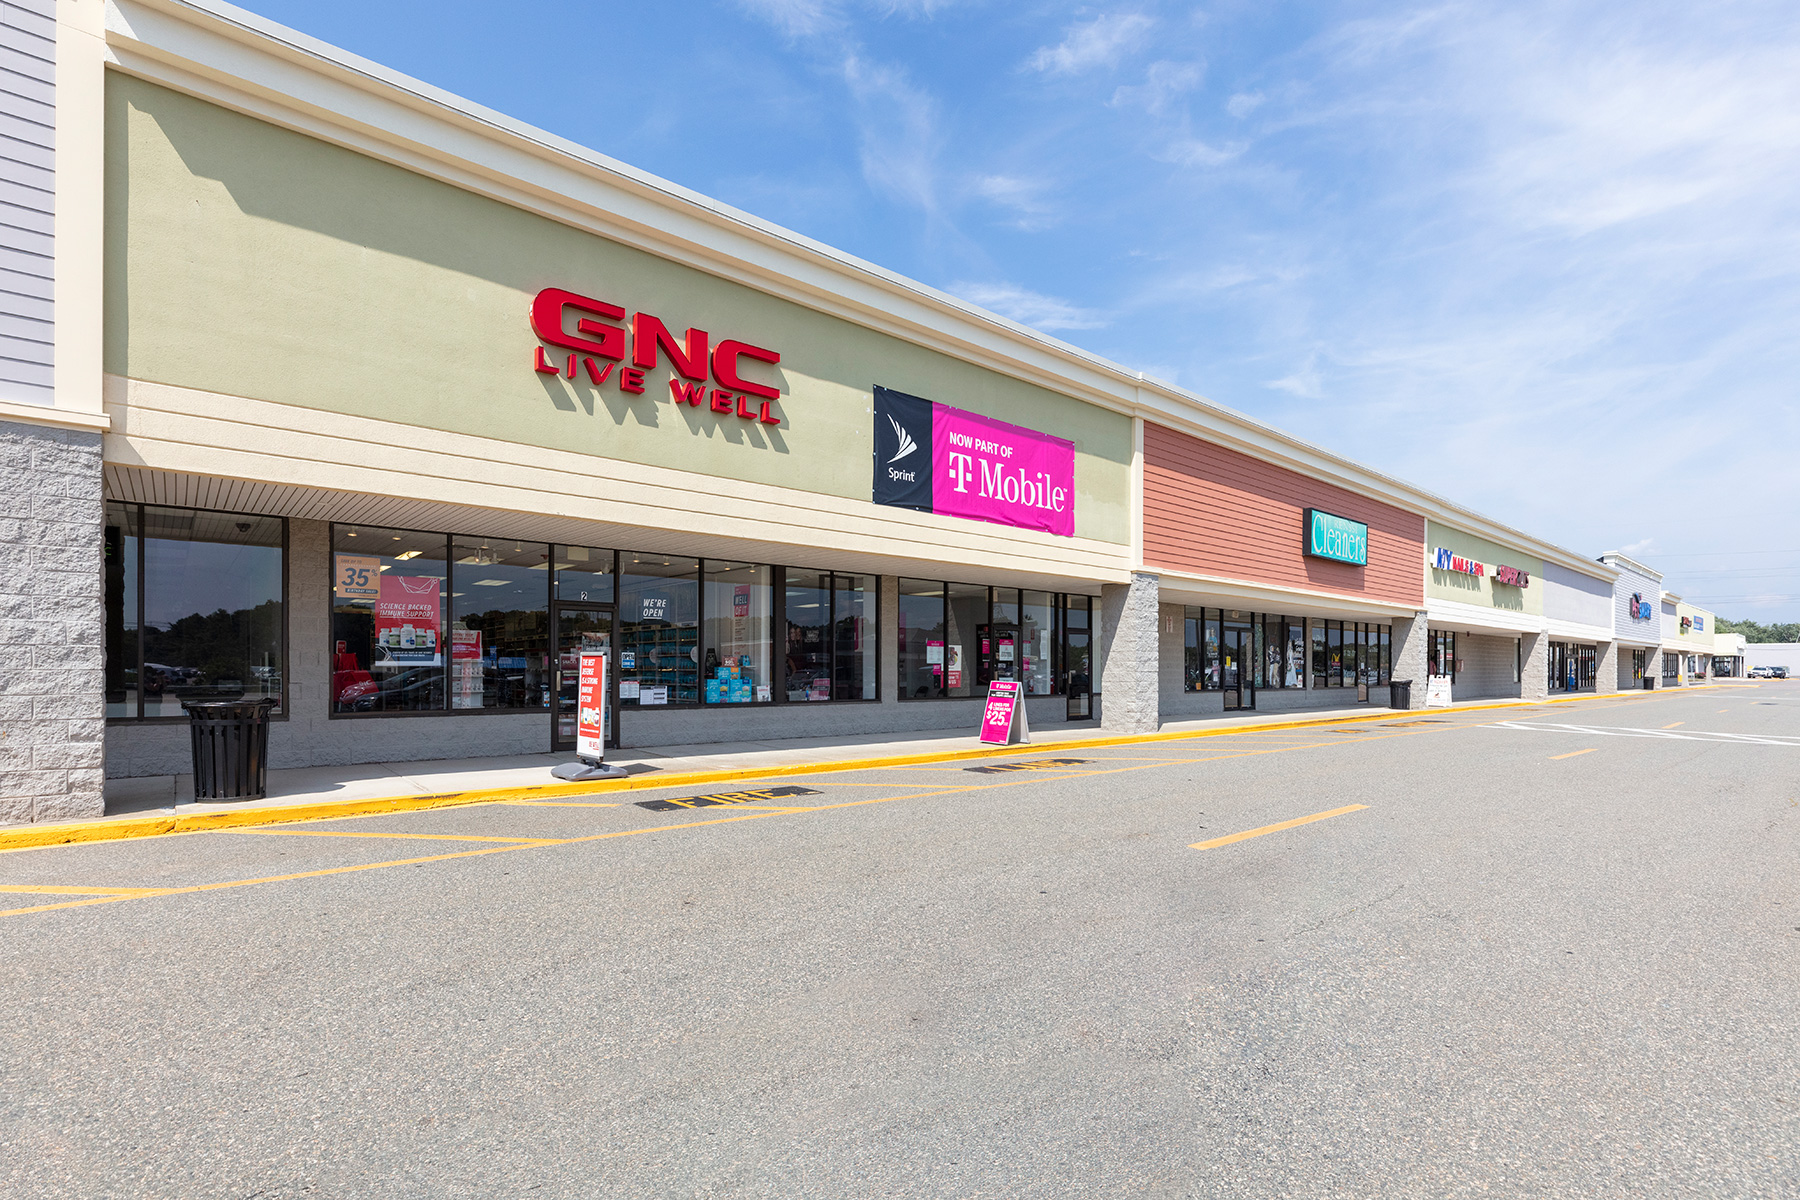 Facade of GNC and other stores in Shaws Plaza